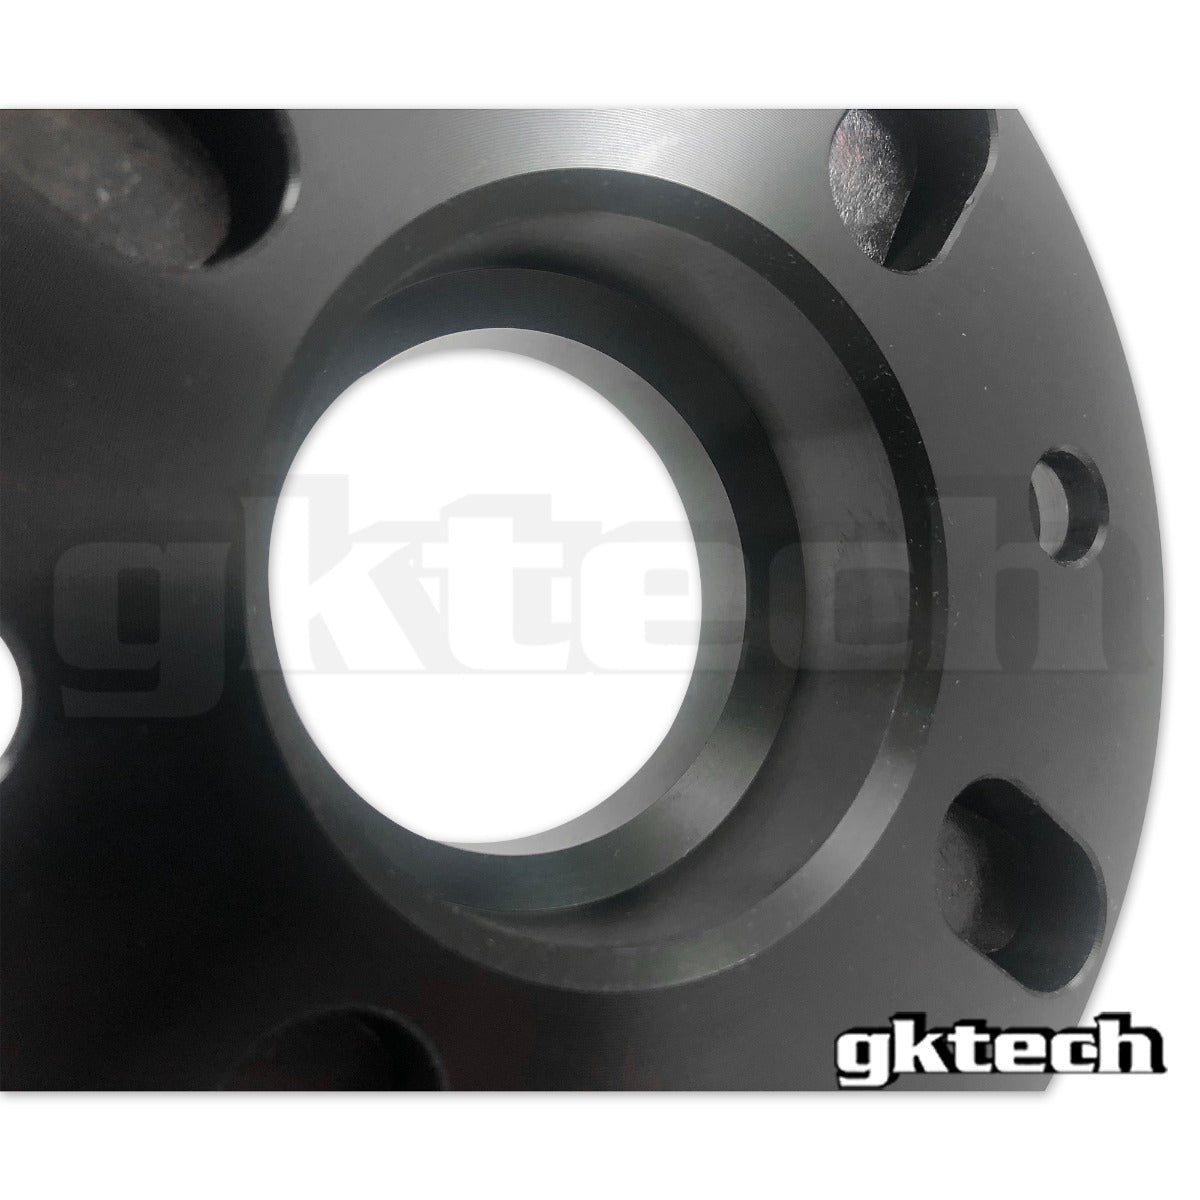 5x100 to 5x114.3 FR-S / GR86 / BRZ bolt on conversion spacer